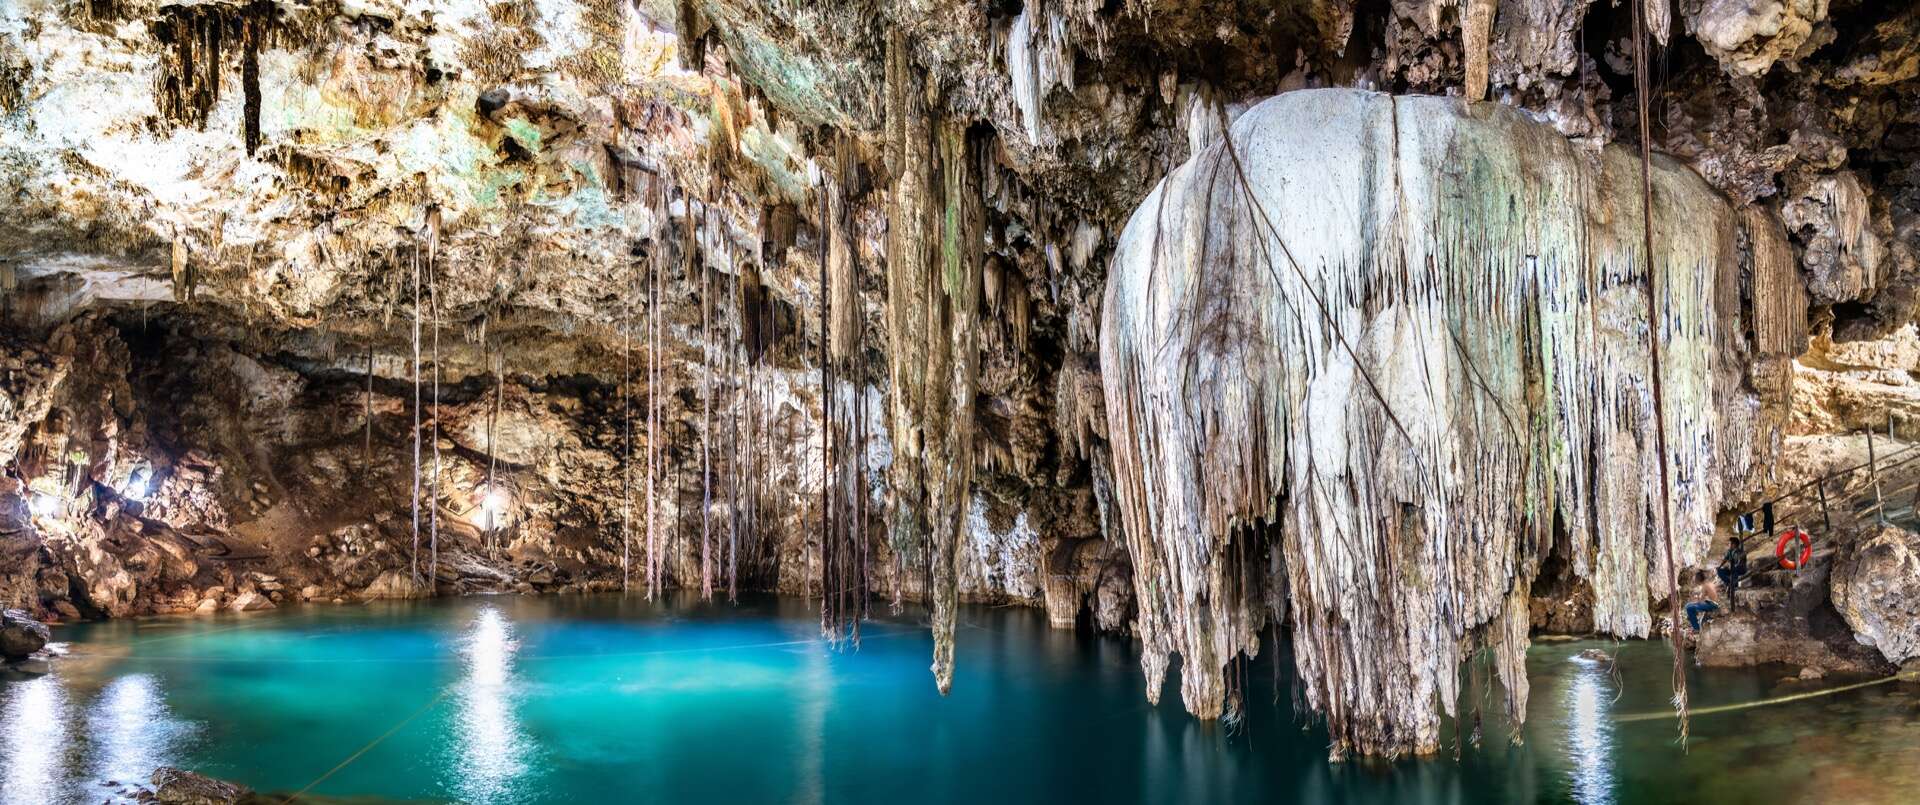 An amazing microbial diversity has been discovered in a huge underground labyrinth in Mexico